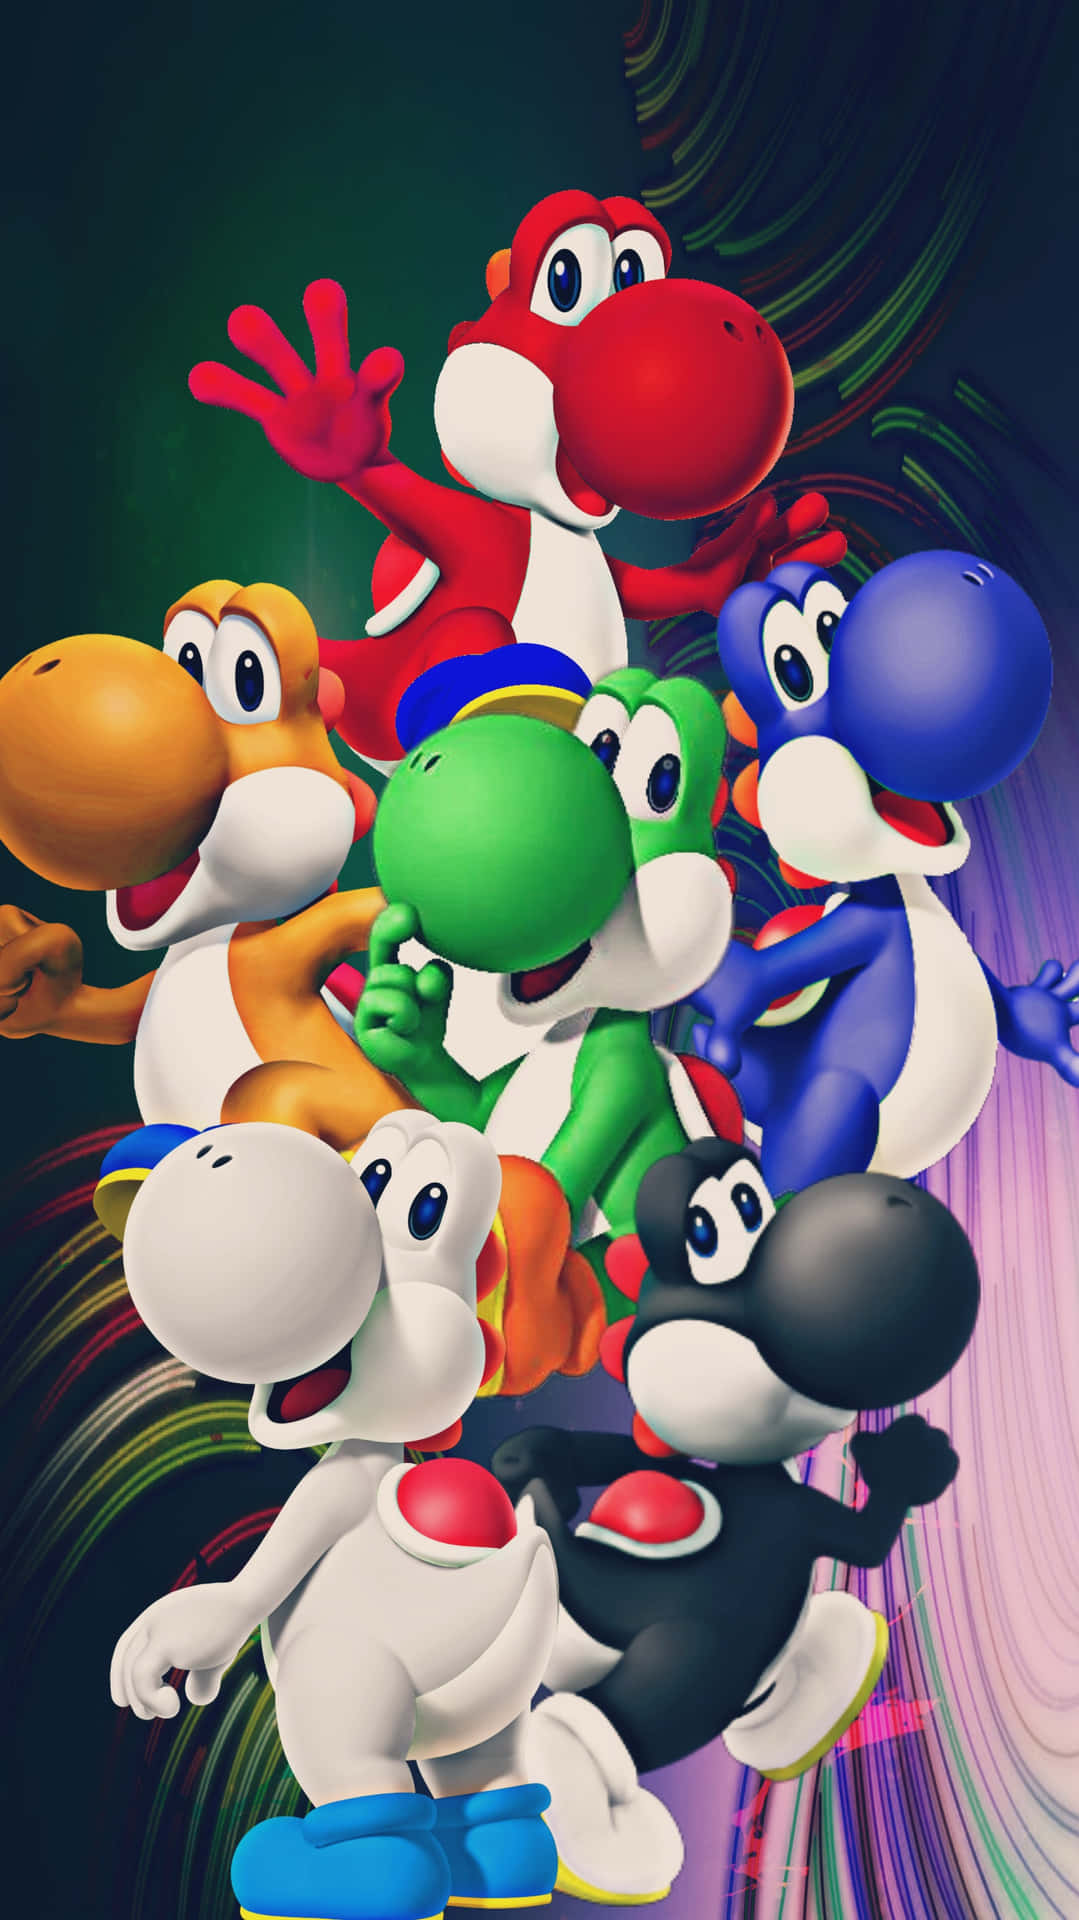 Yoshi - He's Here To Jump Into Your Wildest Adventures!